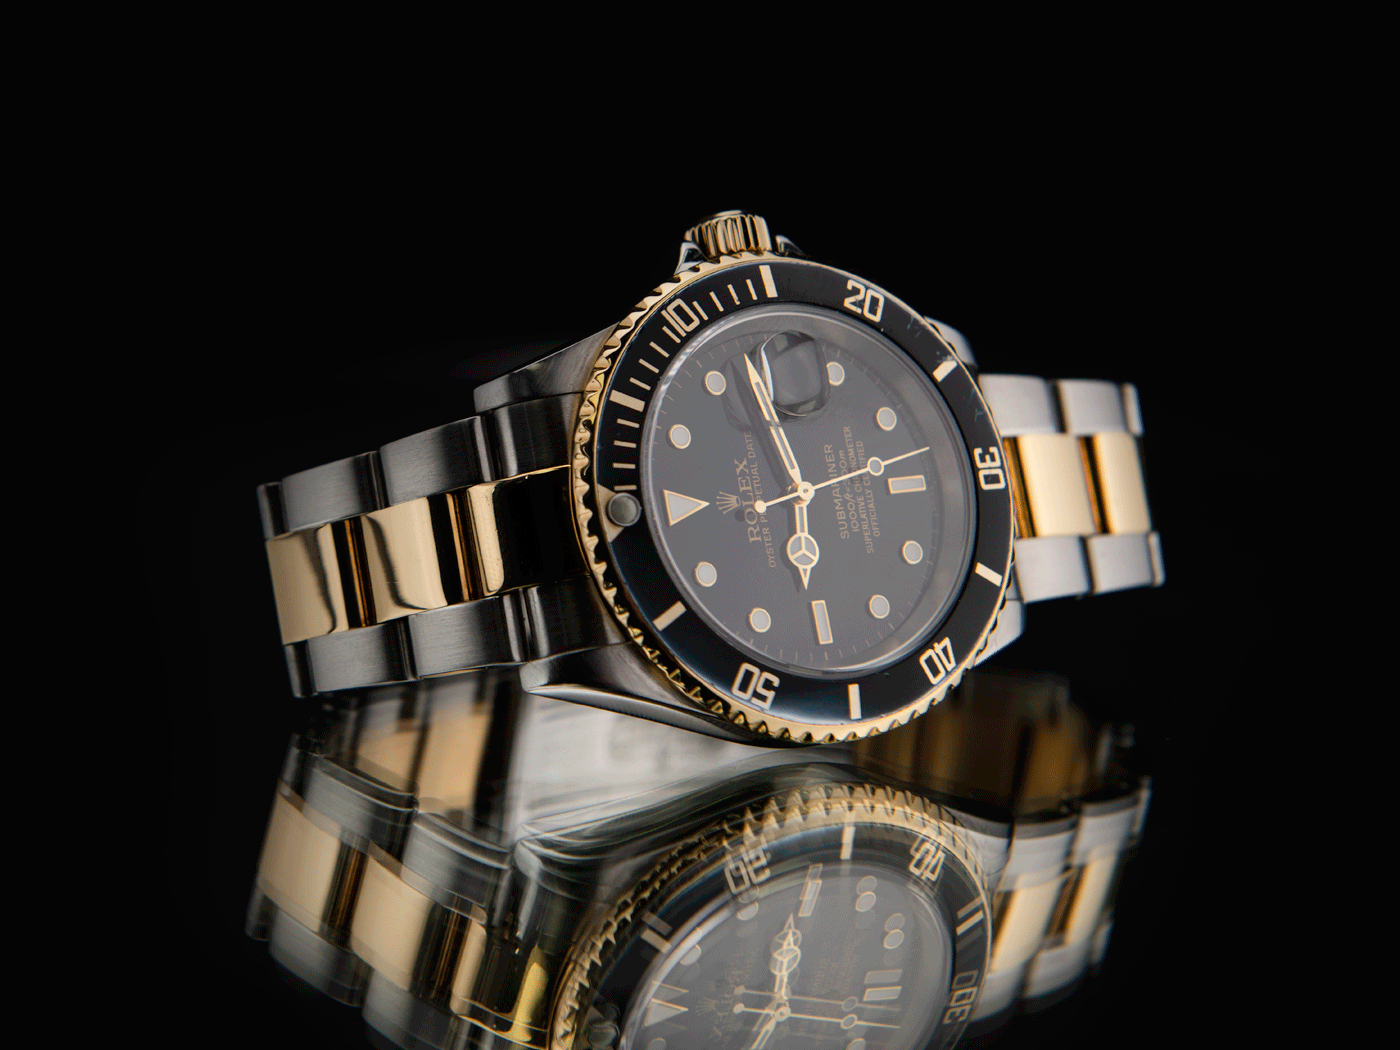 Black dial and bezel Submariner with a two-tone Silver and Gold bracelet